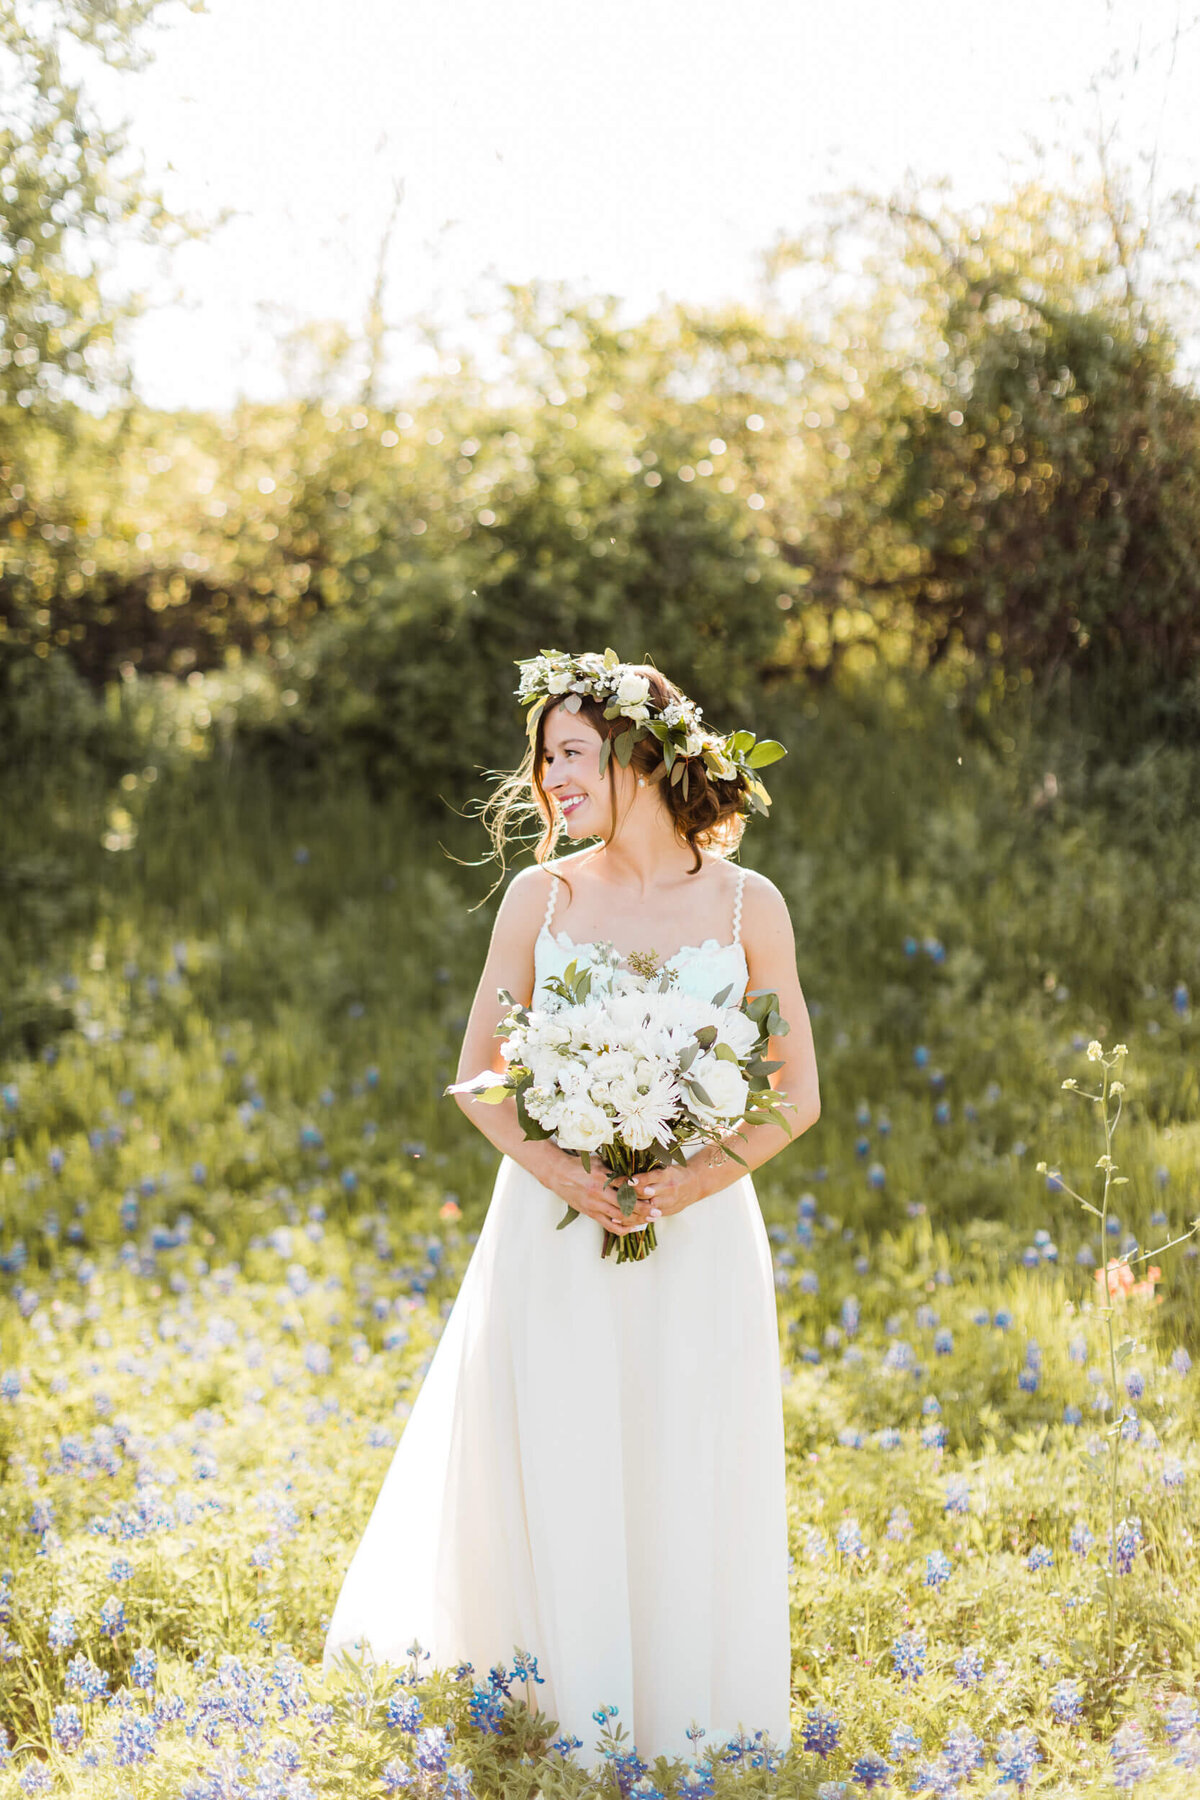 Photos of the bride with bluebonnets in Dallas, TX